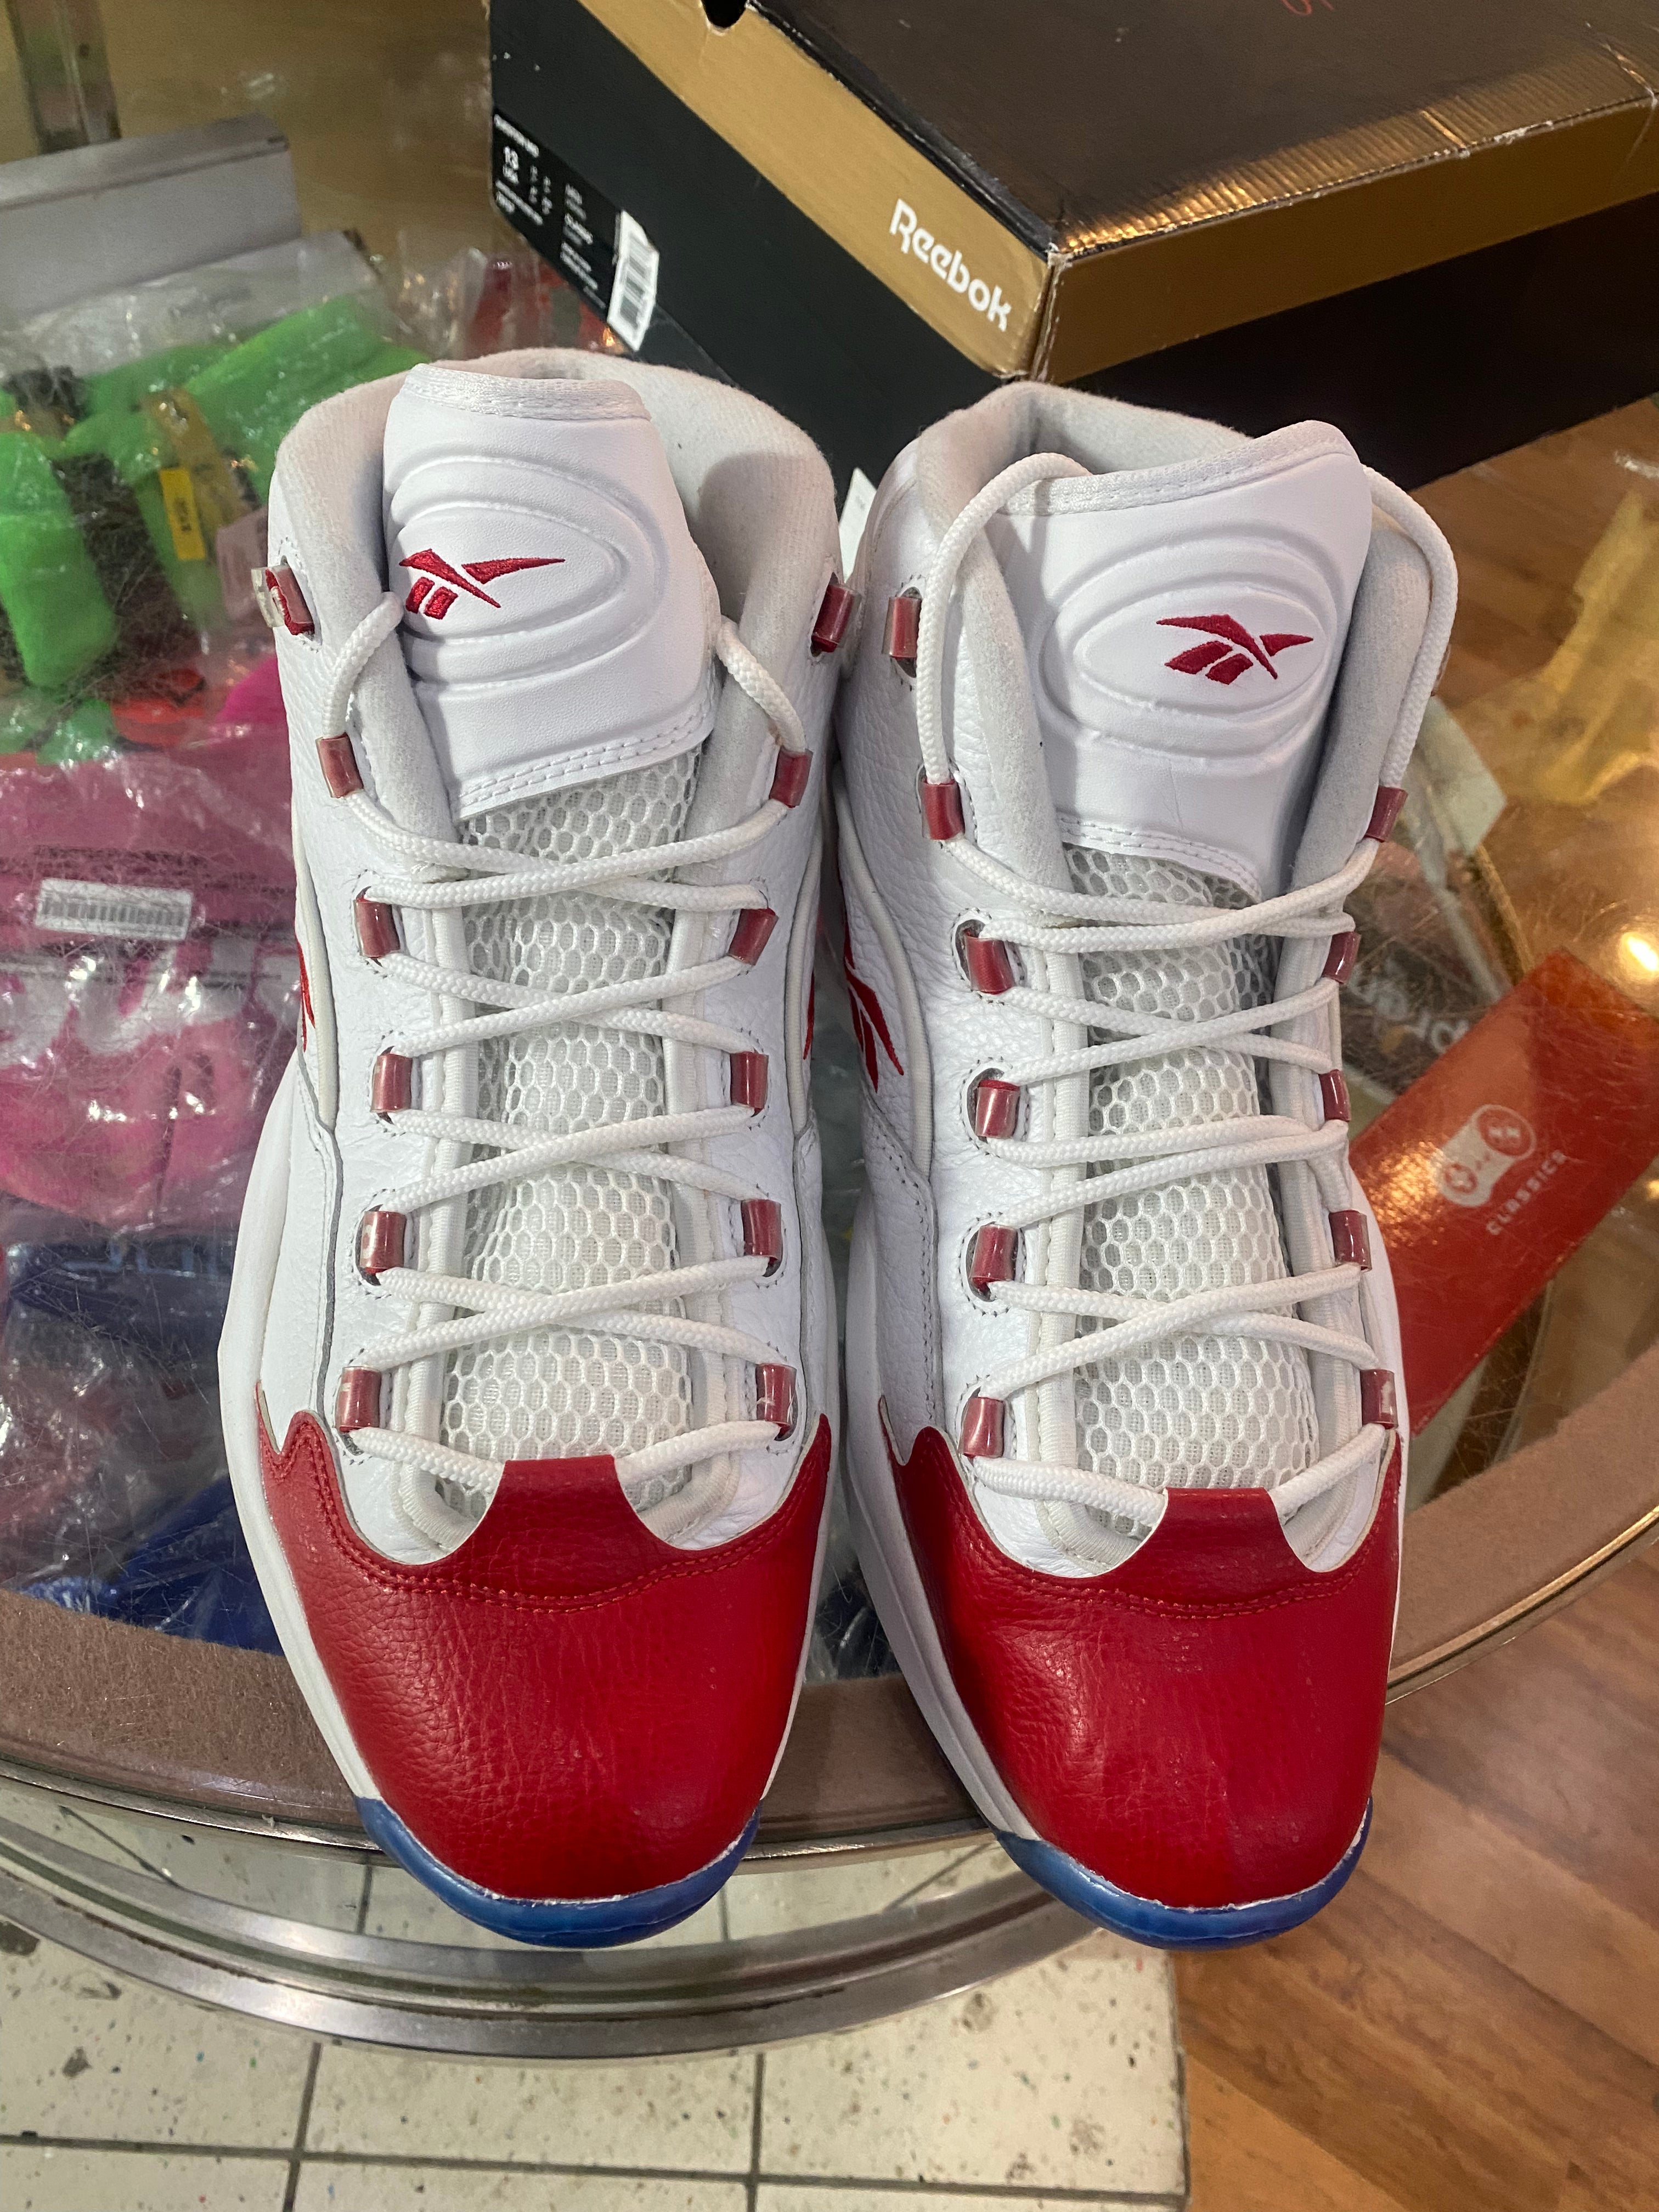 Pearlized Red Reebox Question Size 13